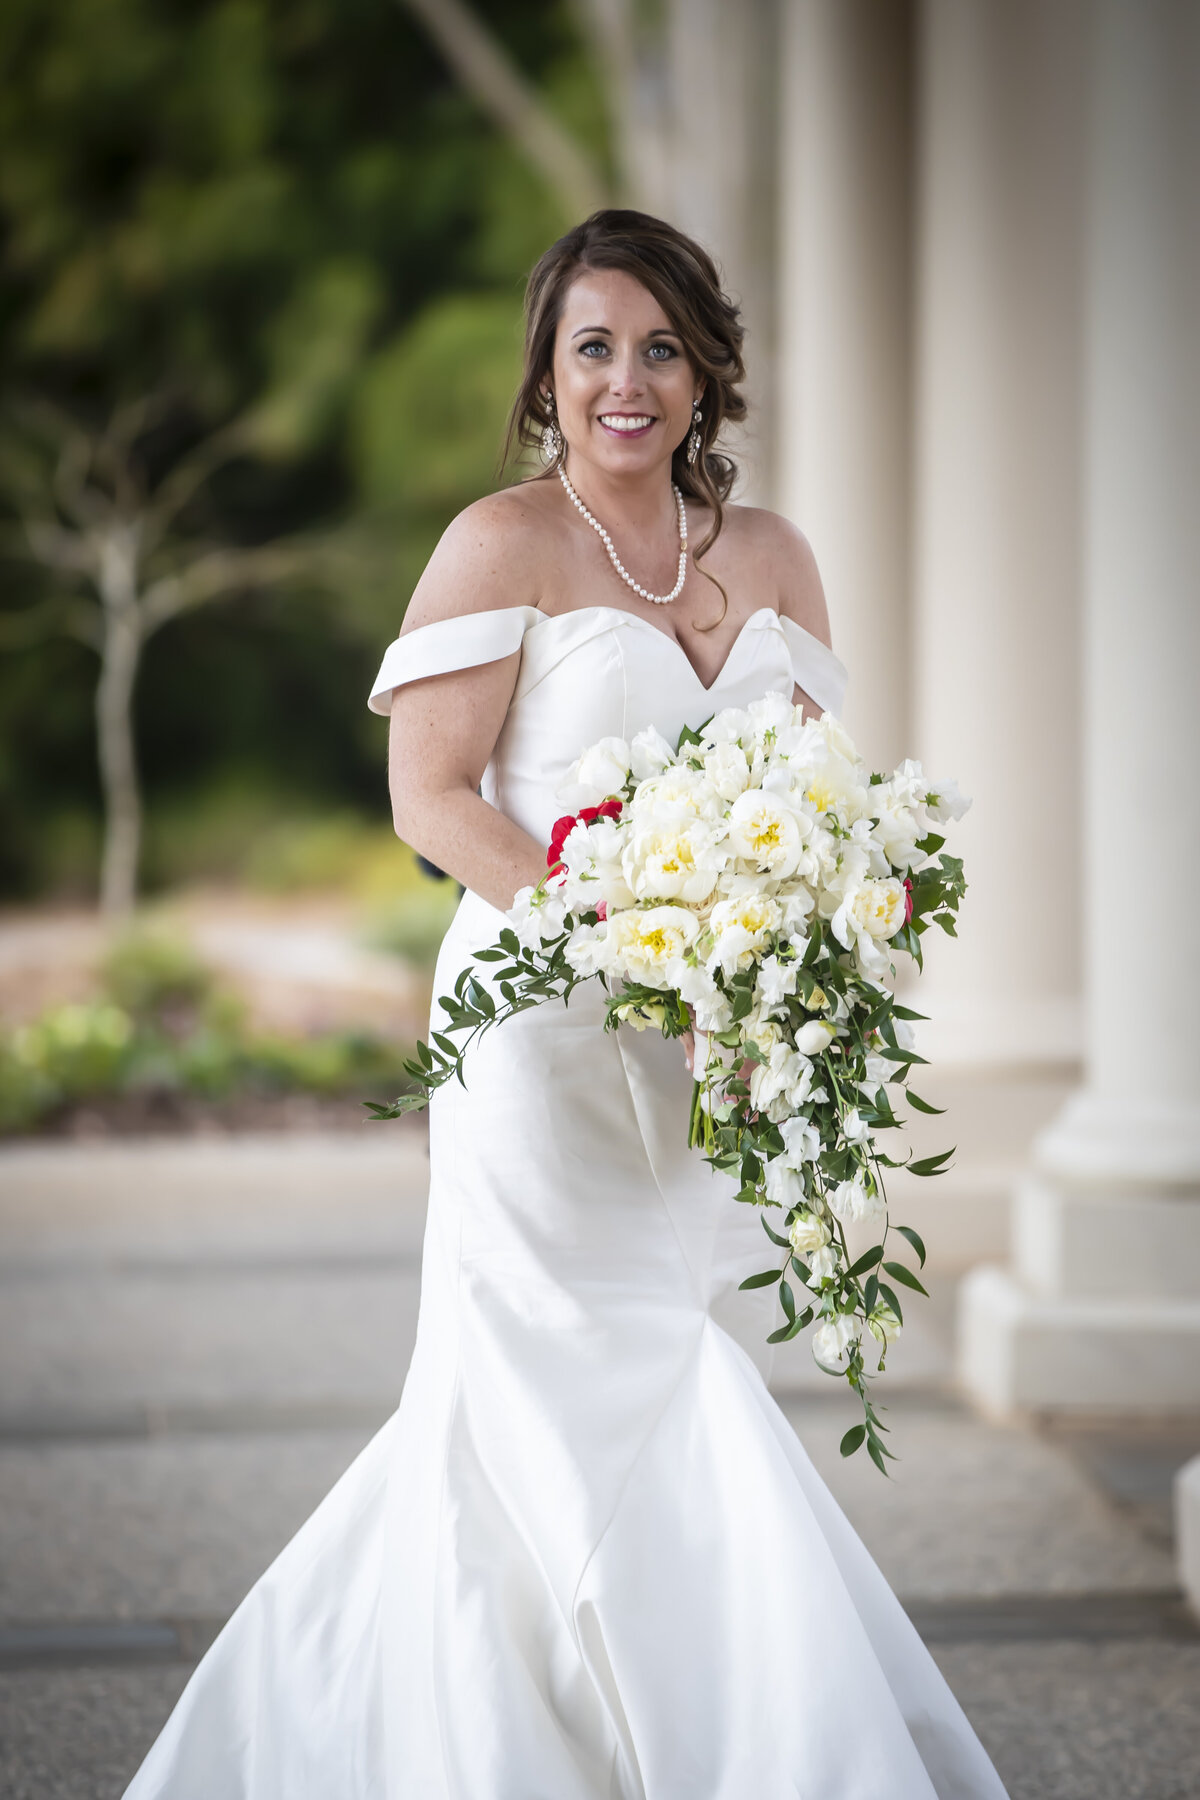 Bride smiling while holding bouquet.